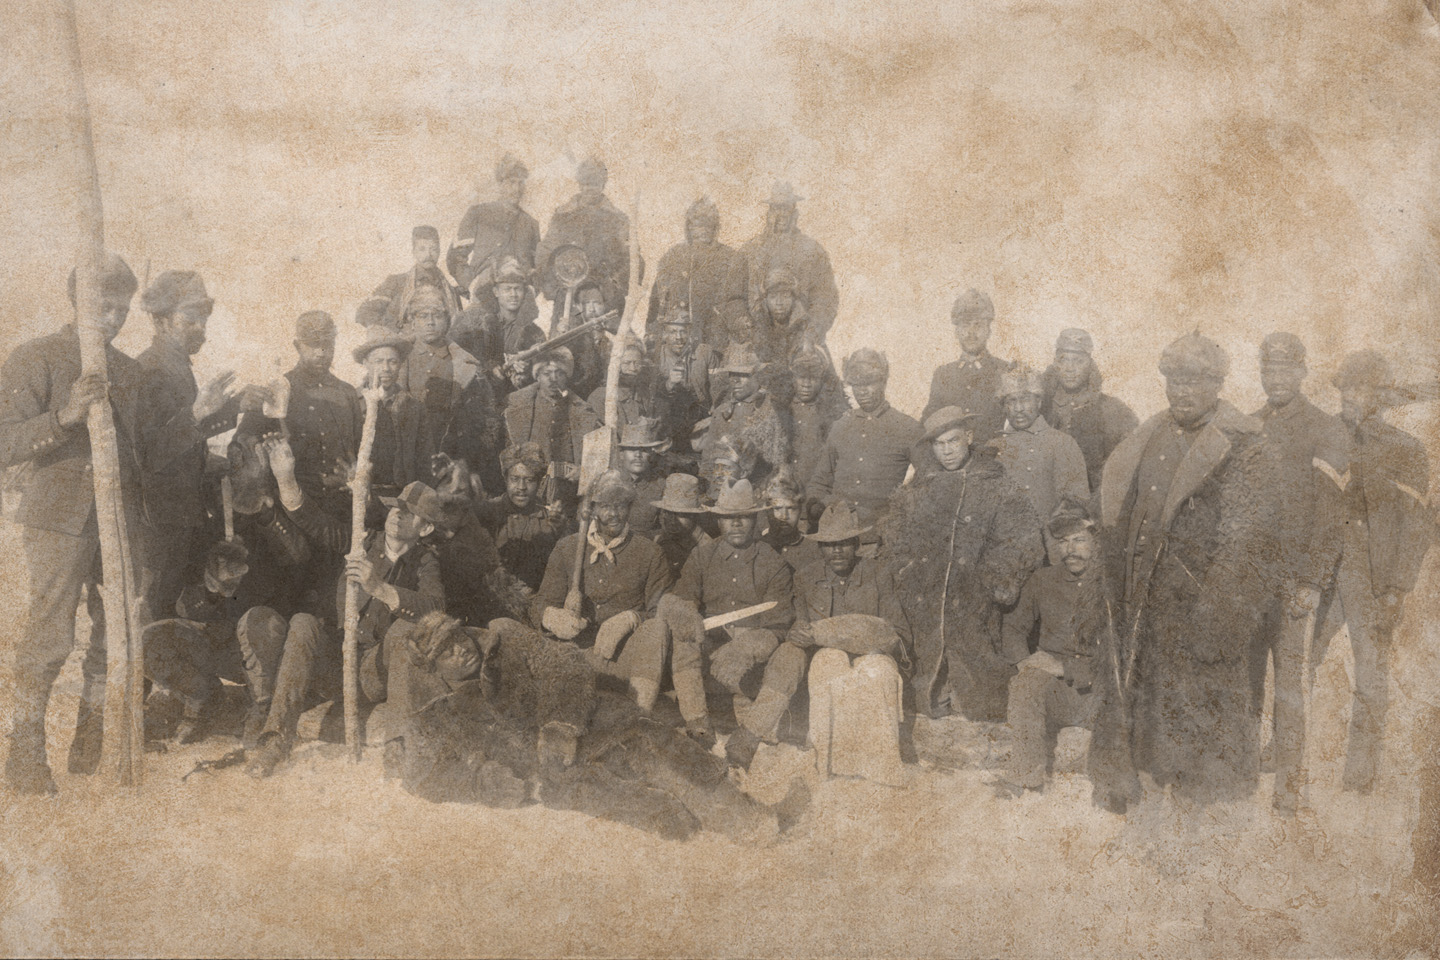 Buffalo Soldiers Group Image